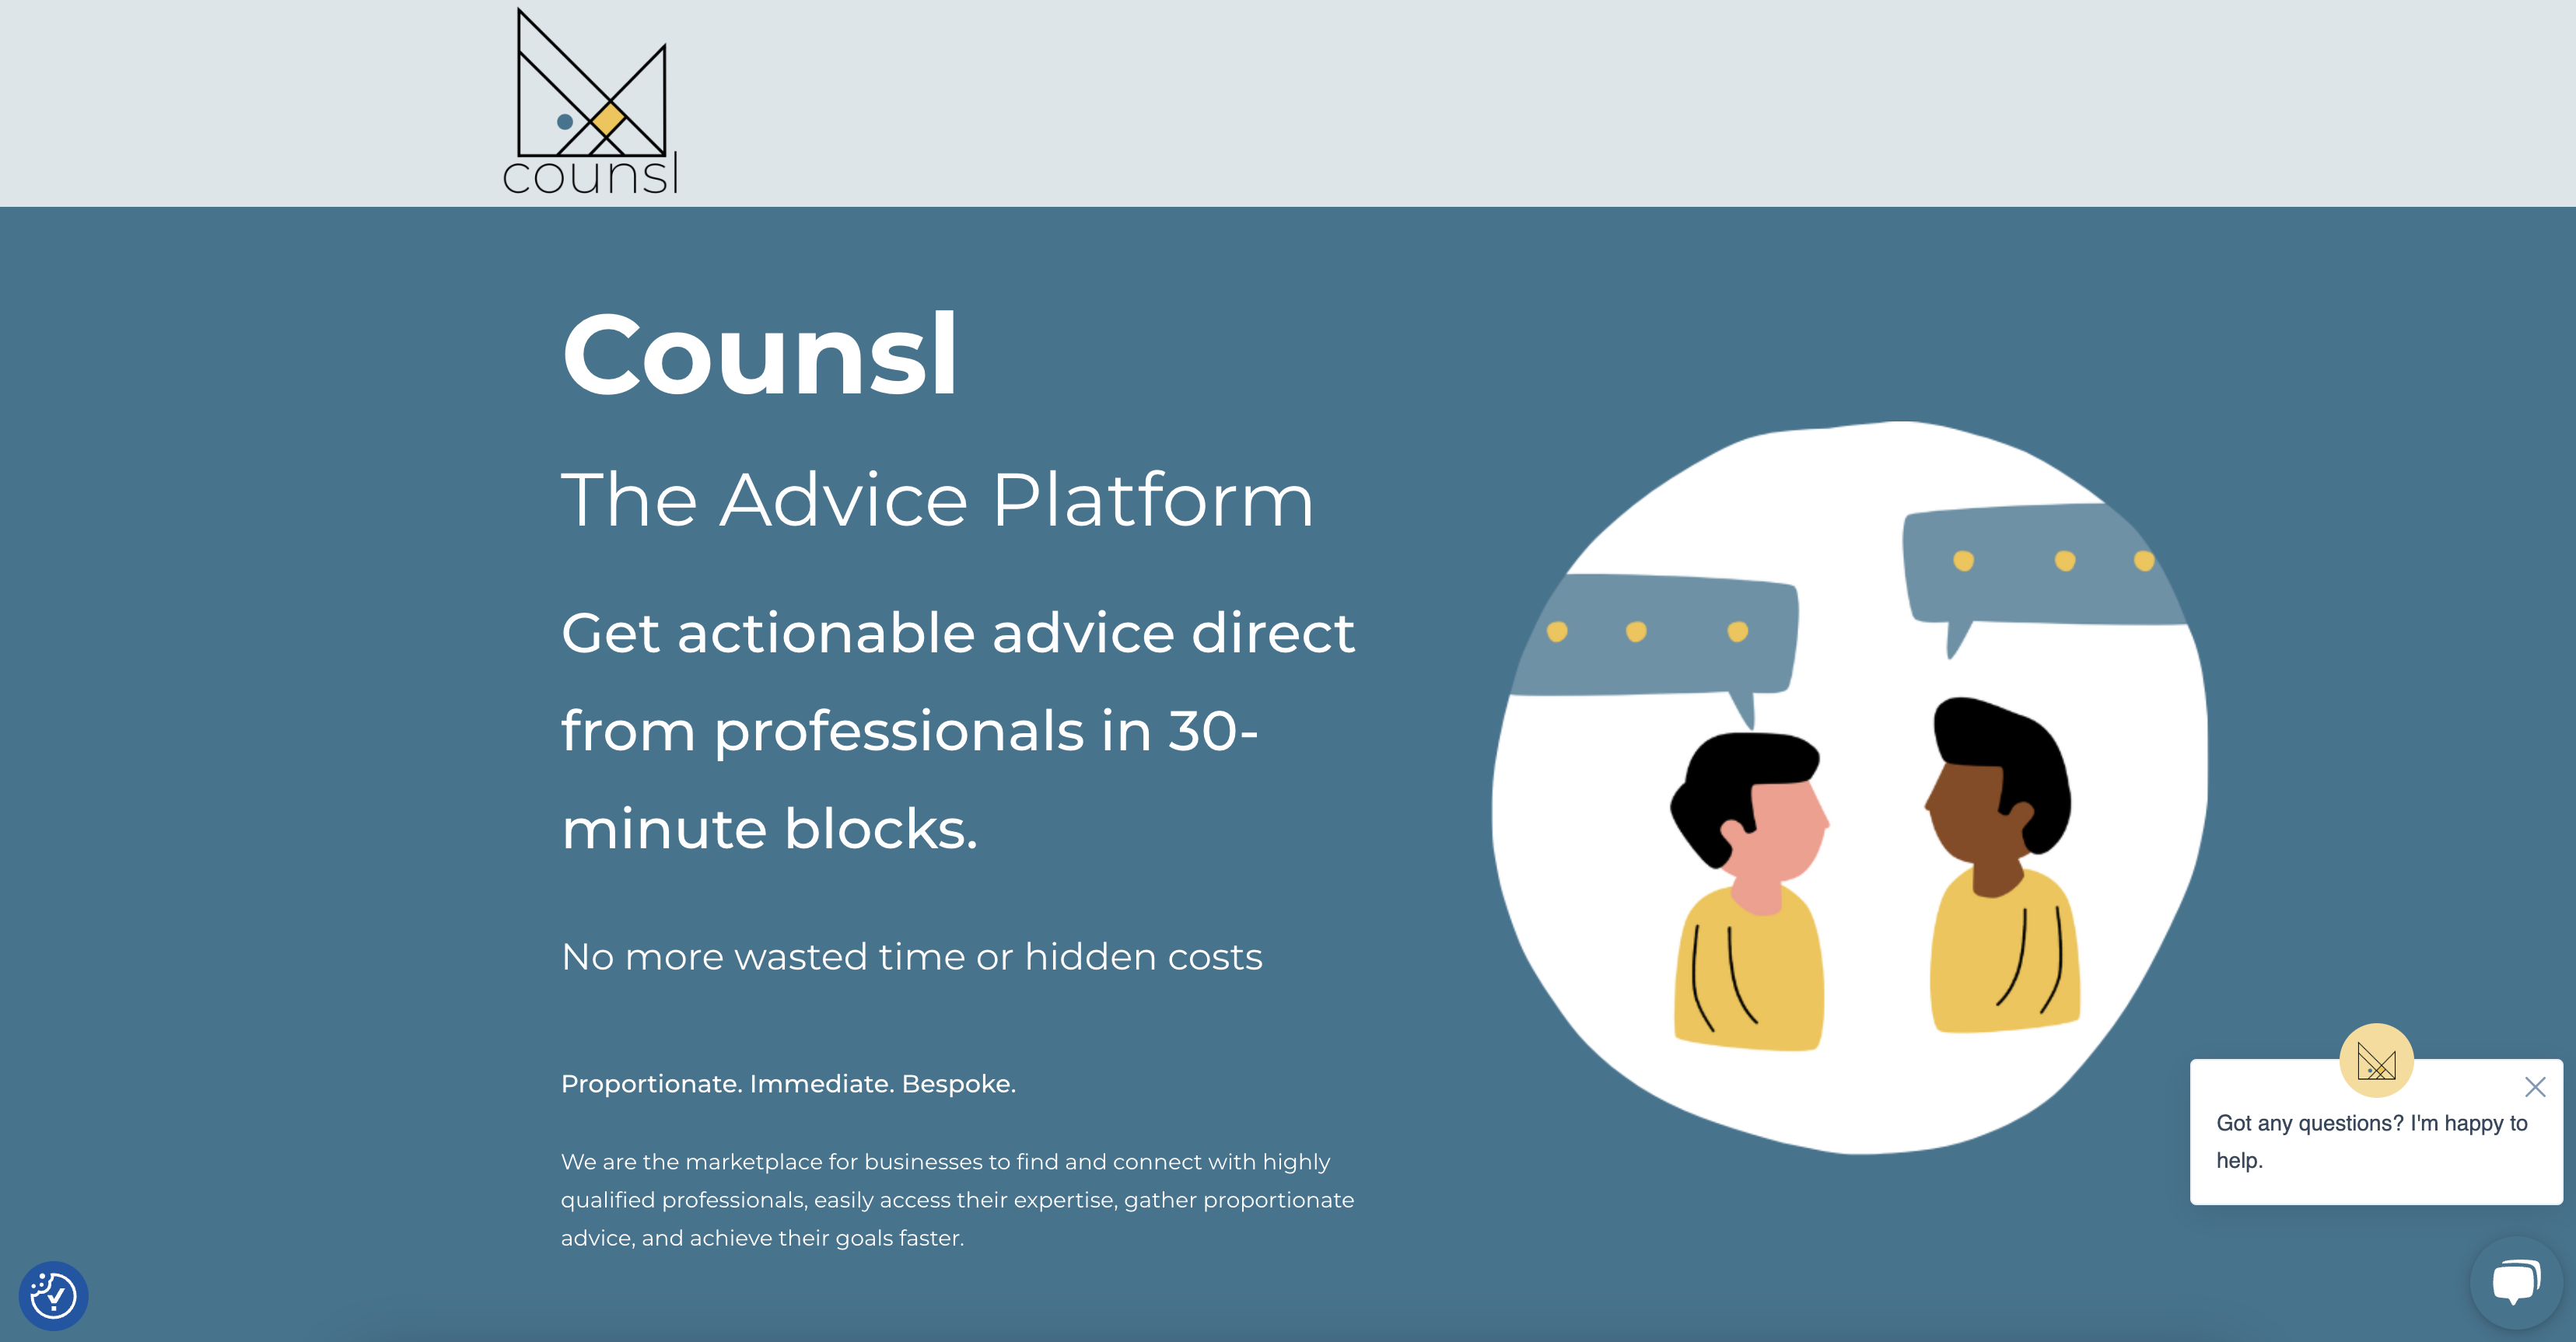 startuptile Counsl - The Advice Platform-Get actionable advice from professionals in 30minute blocks.